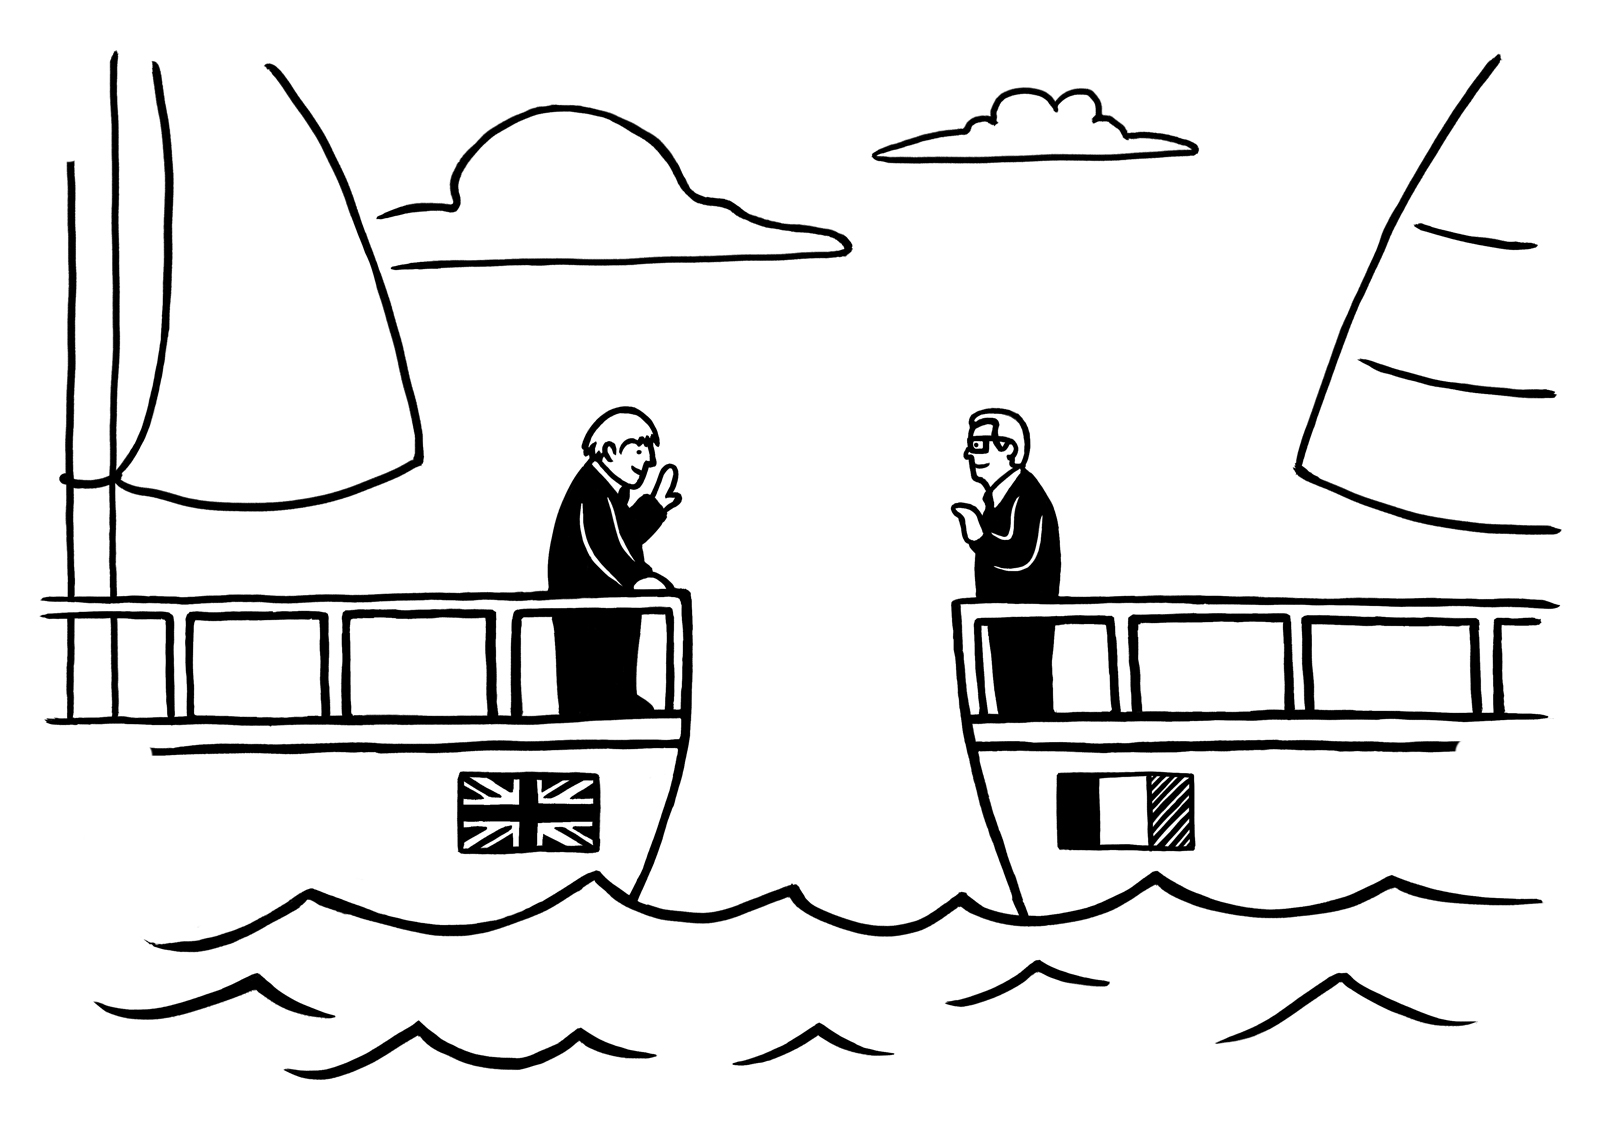 Boat Owners and Brexit